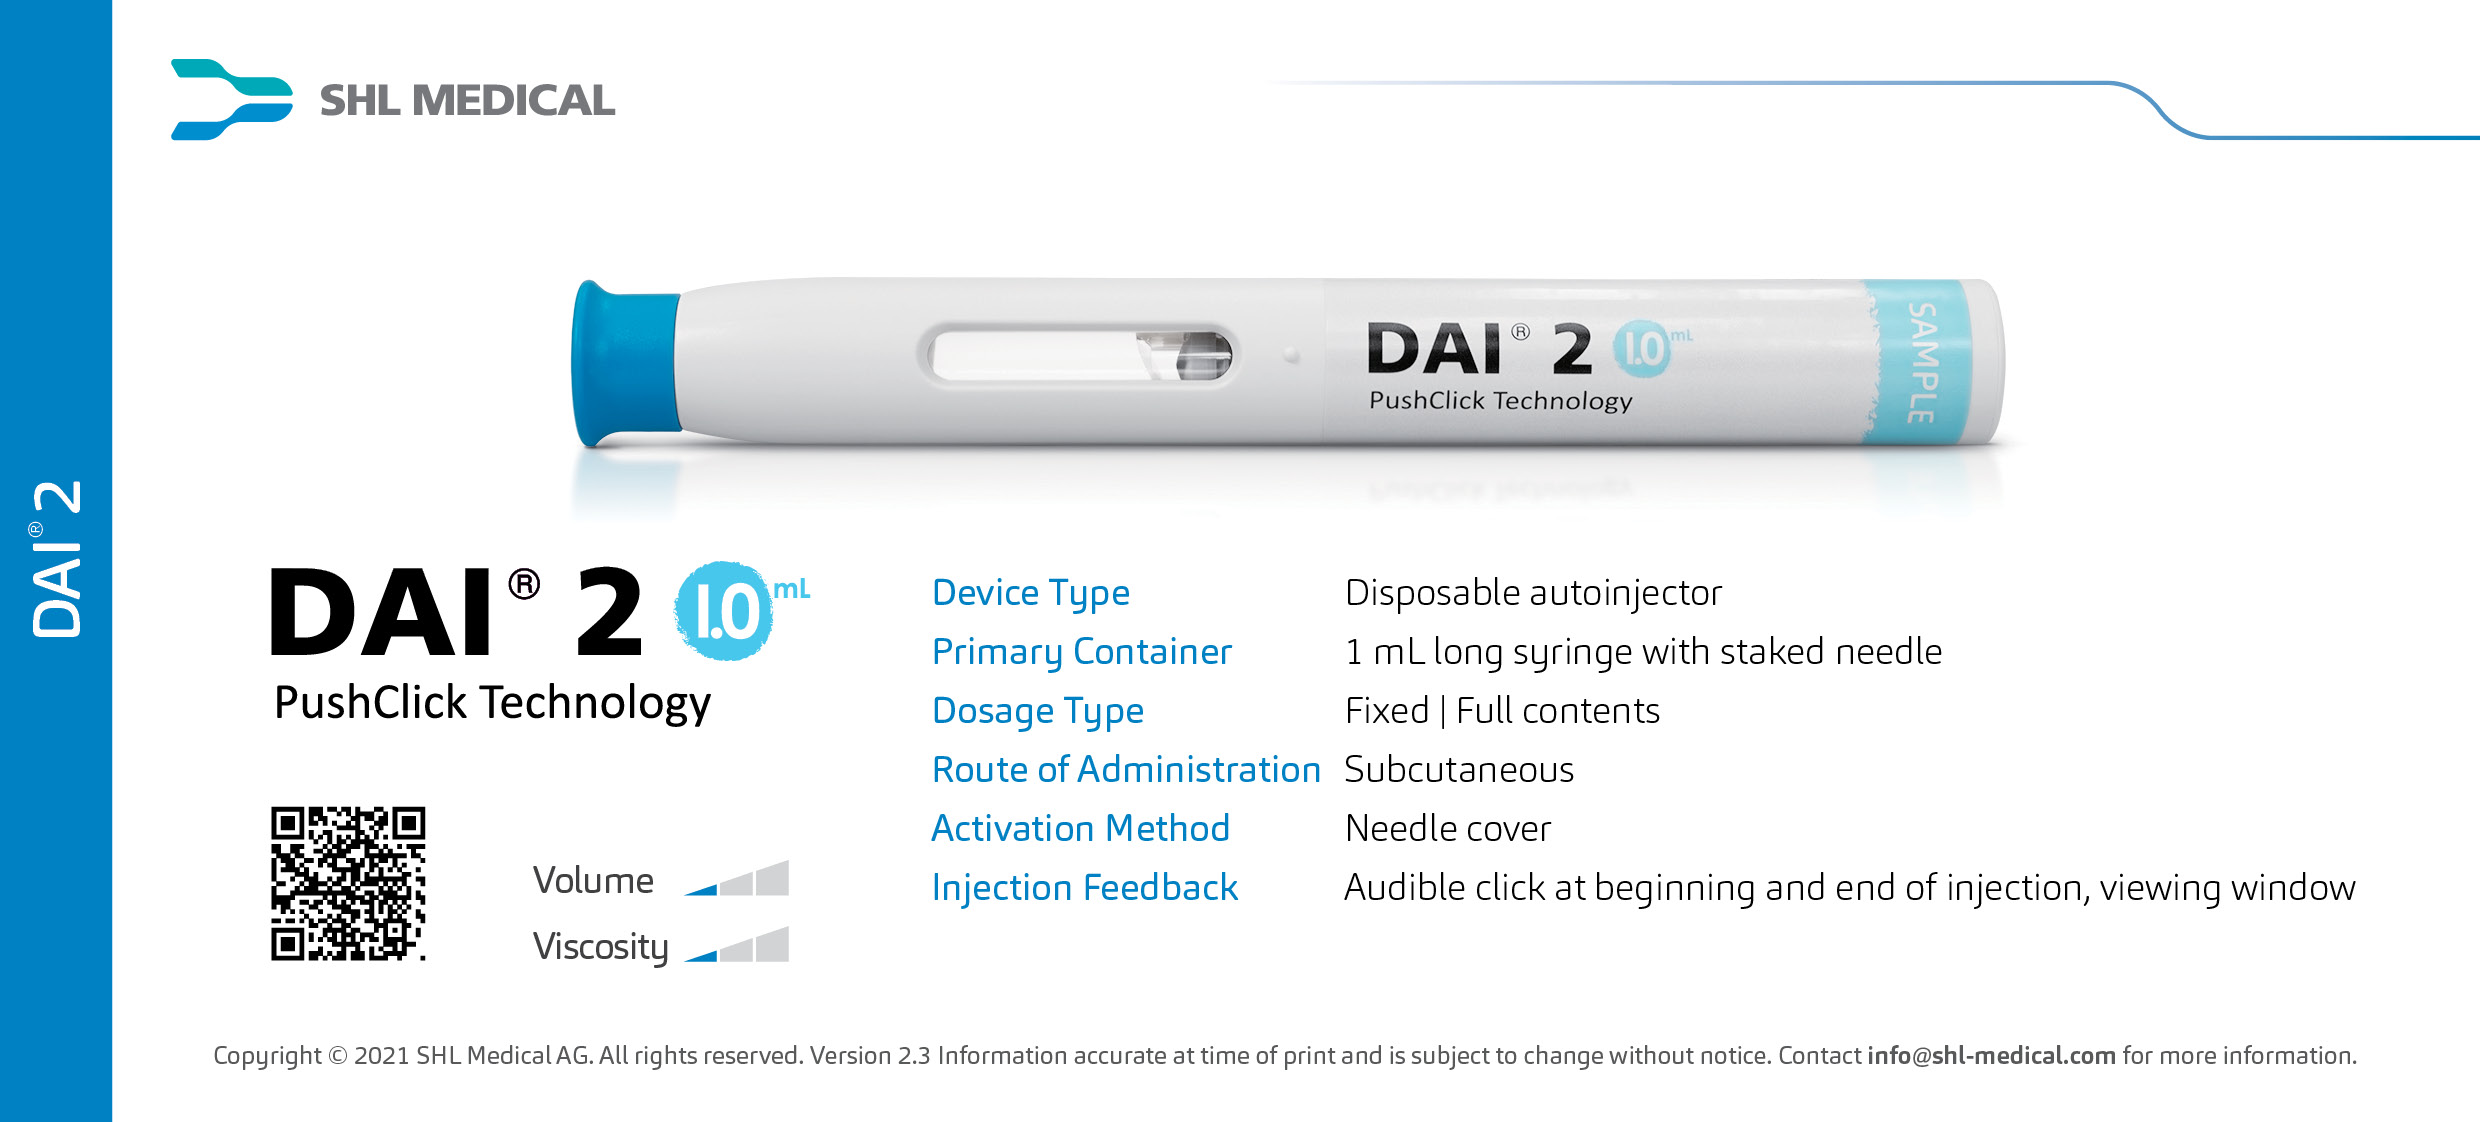 DAI 2 autoinjector by SHL Medical